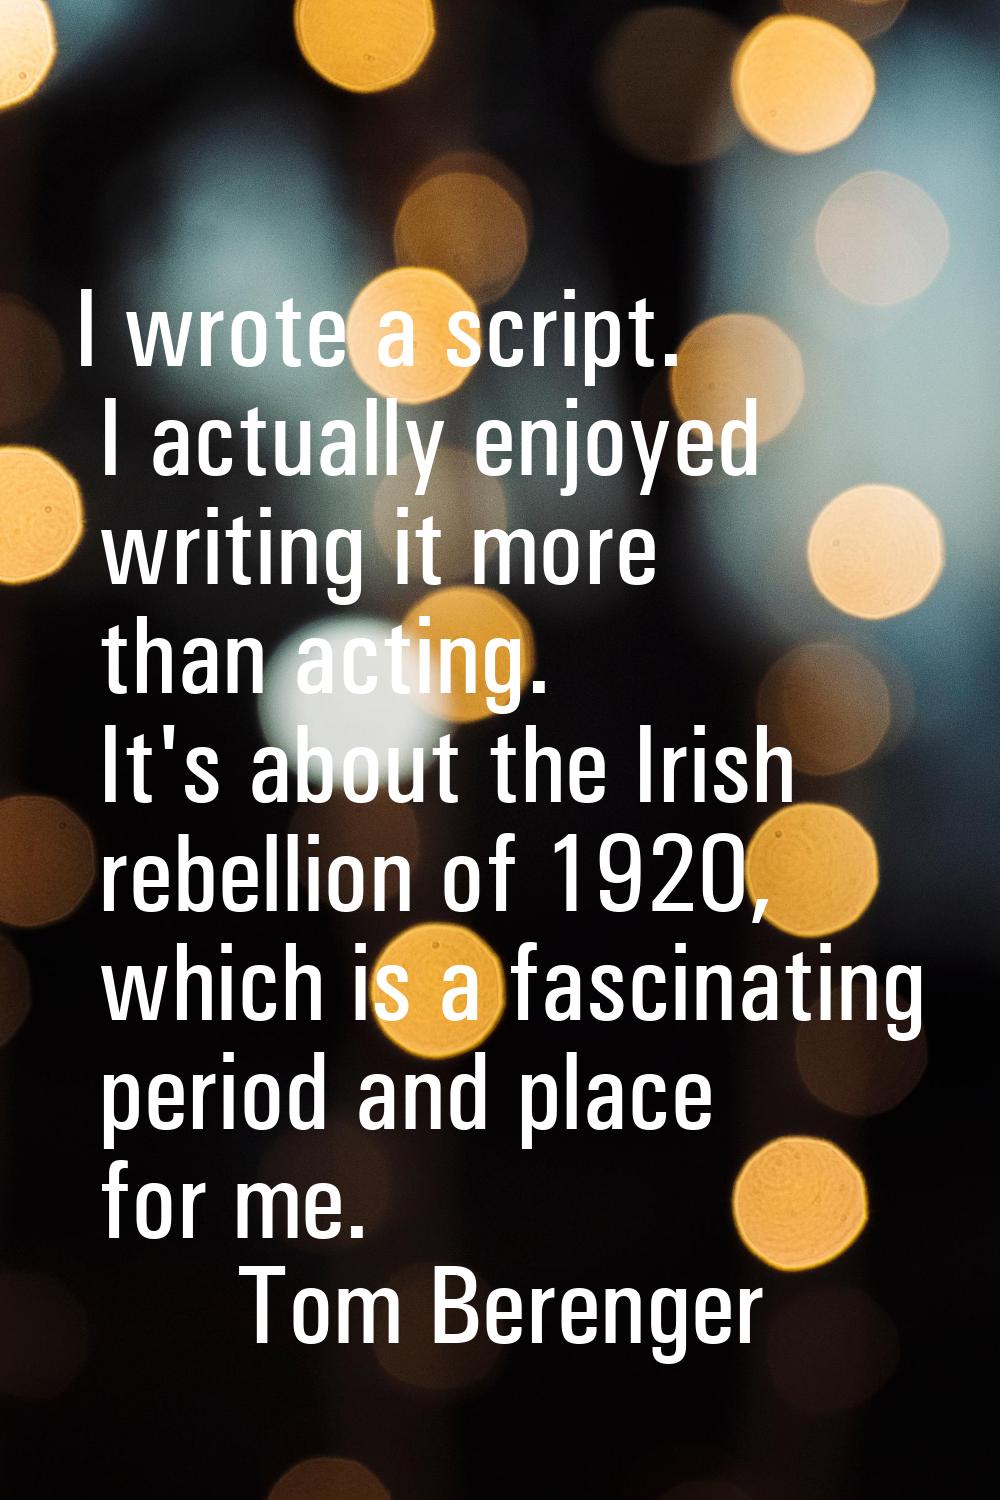 I wrote a script. I actually enjoyed writing it more than acting. It's about the Irish rebellion of